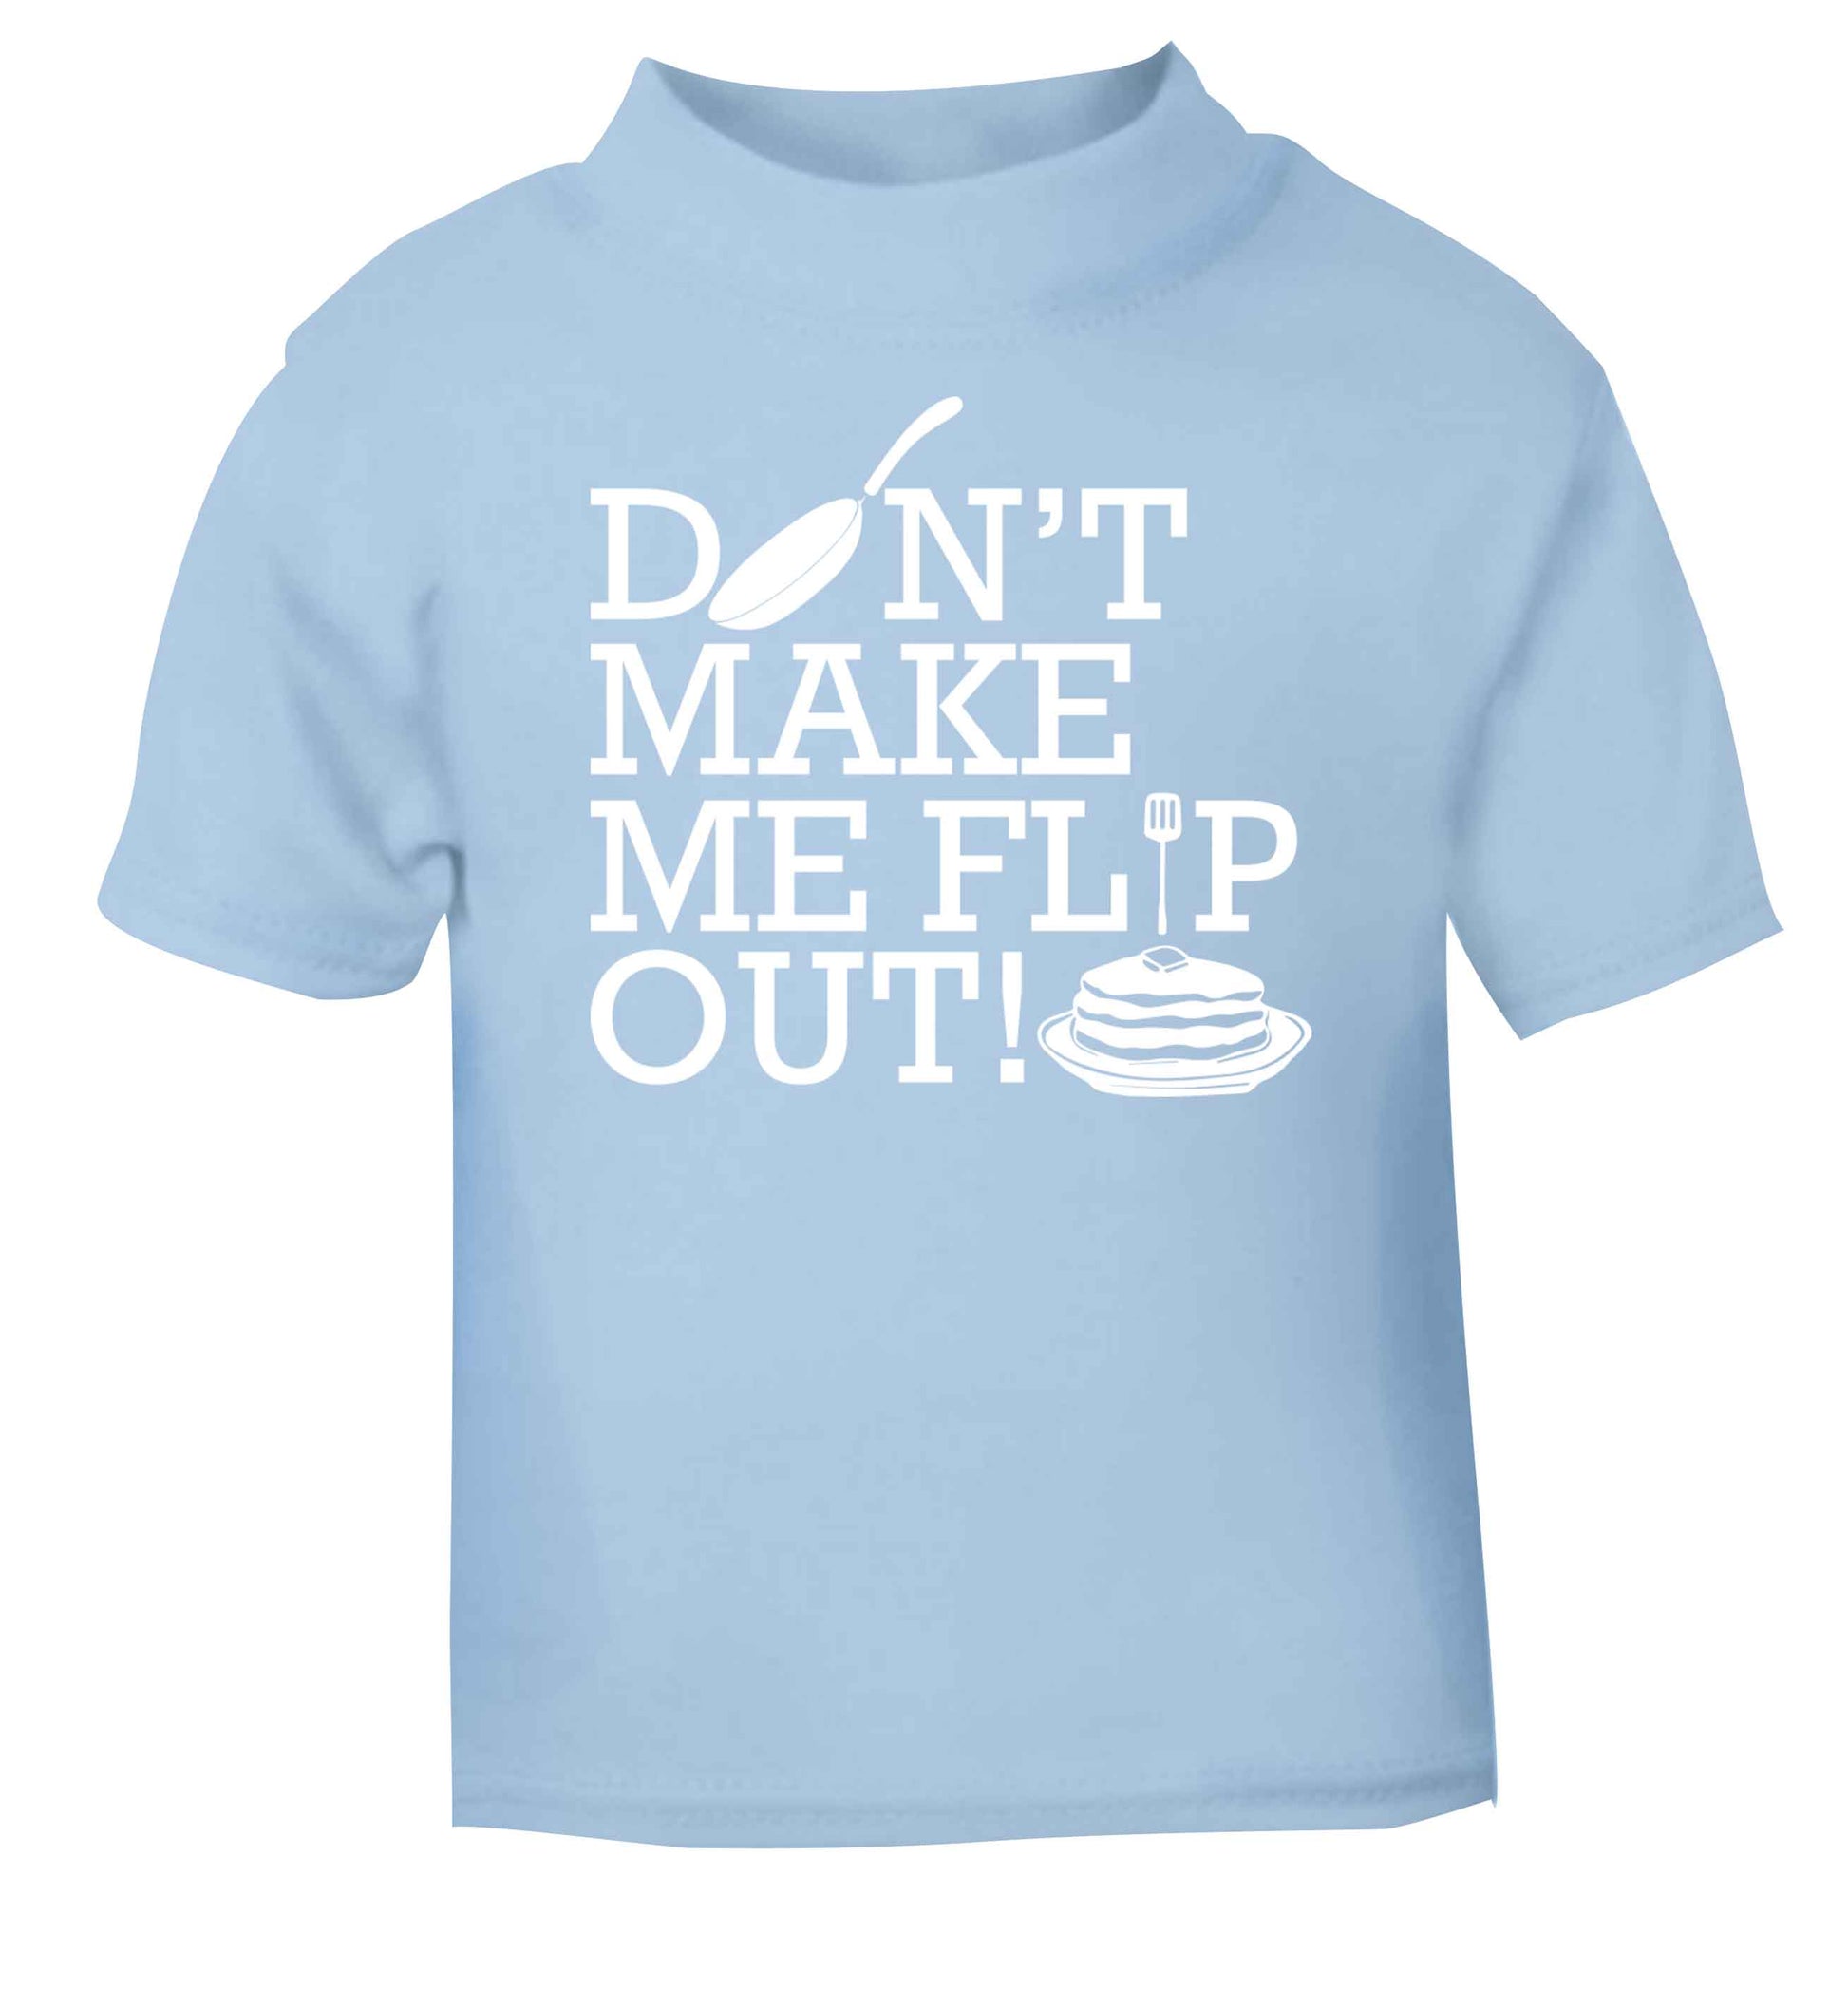 Don't make me flip out light blue baby toddler Tshirt 2 Years